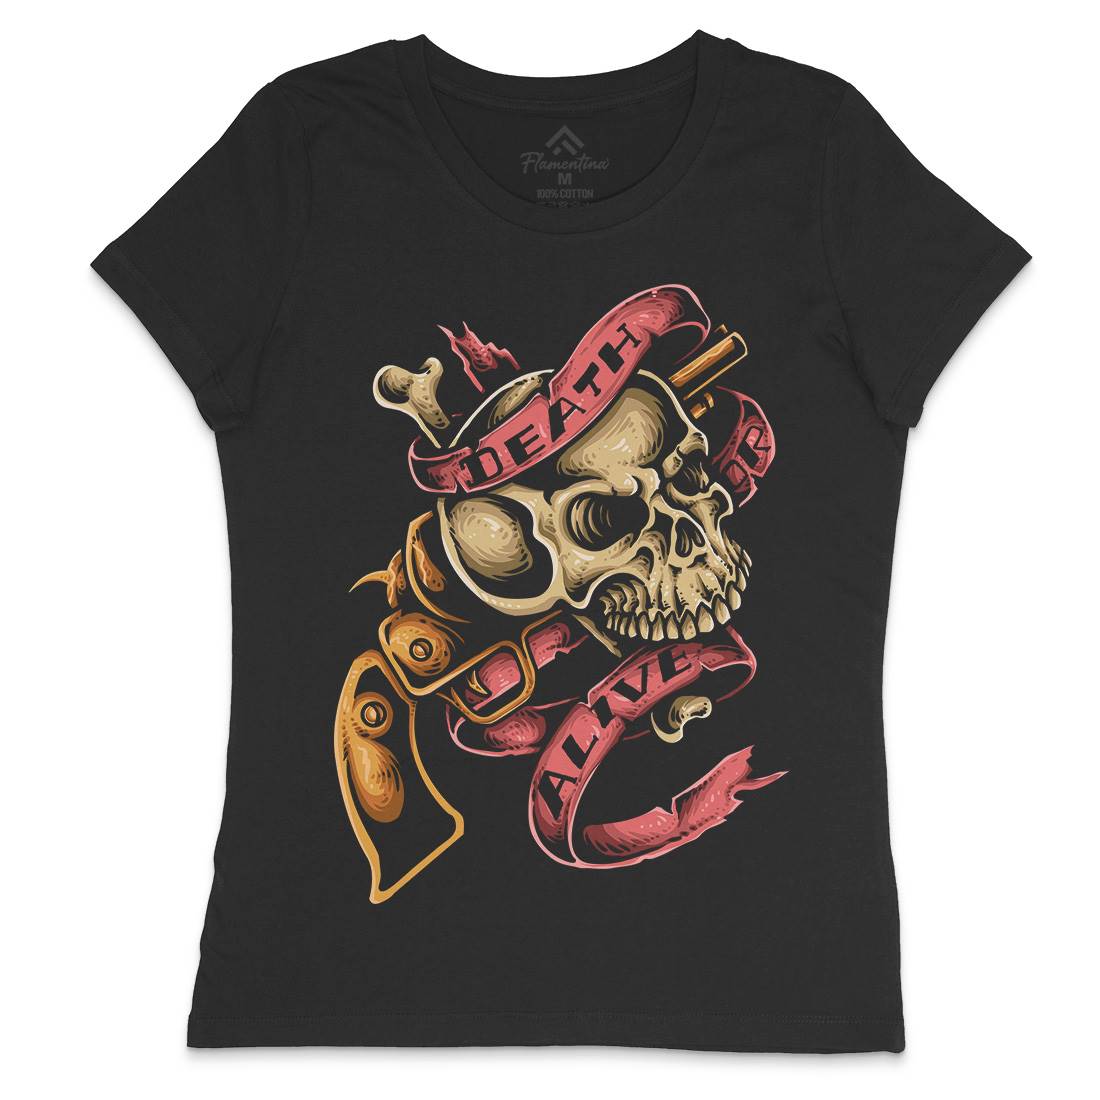 Death Or Alive Womens Crew Neck T-Shirt Navy A416